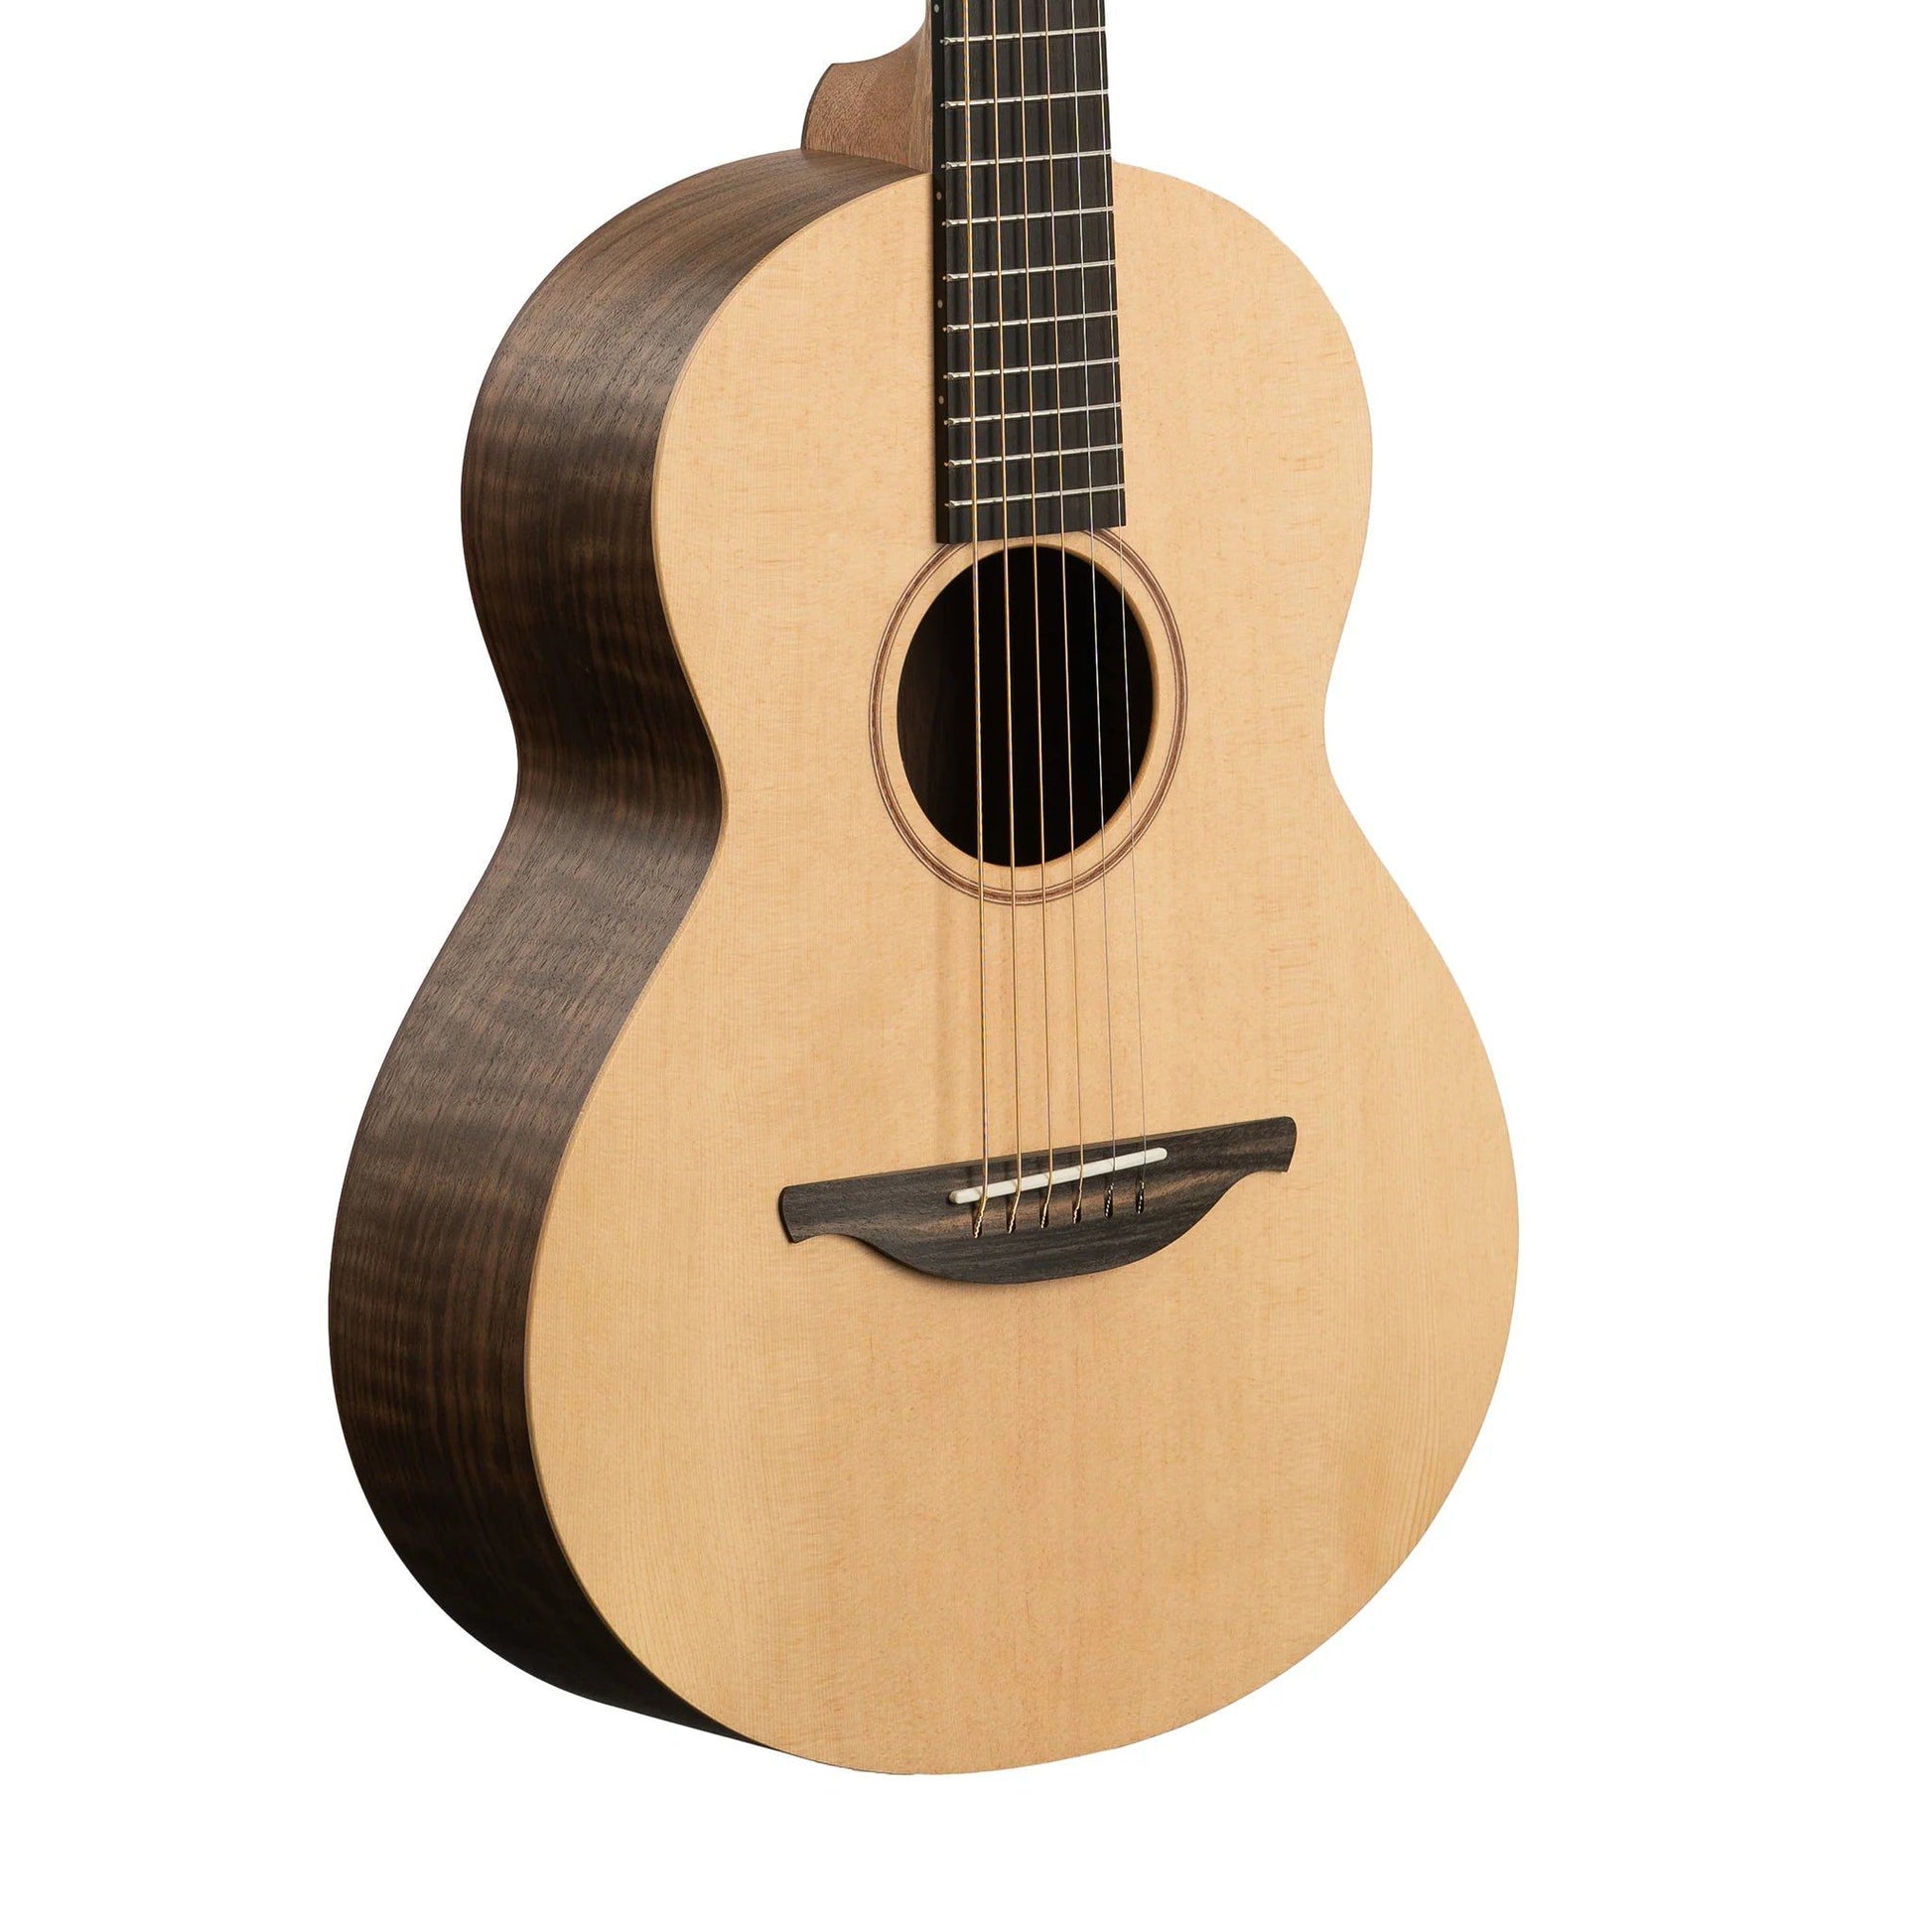 Đàn Guitar Acoustic Sheeran By Lowden Limited Edition Equals Edition Signature - Việt Music